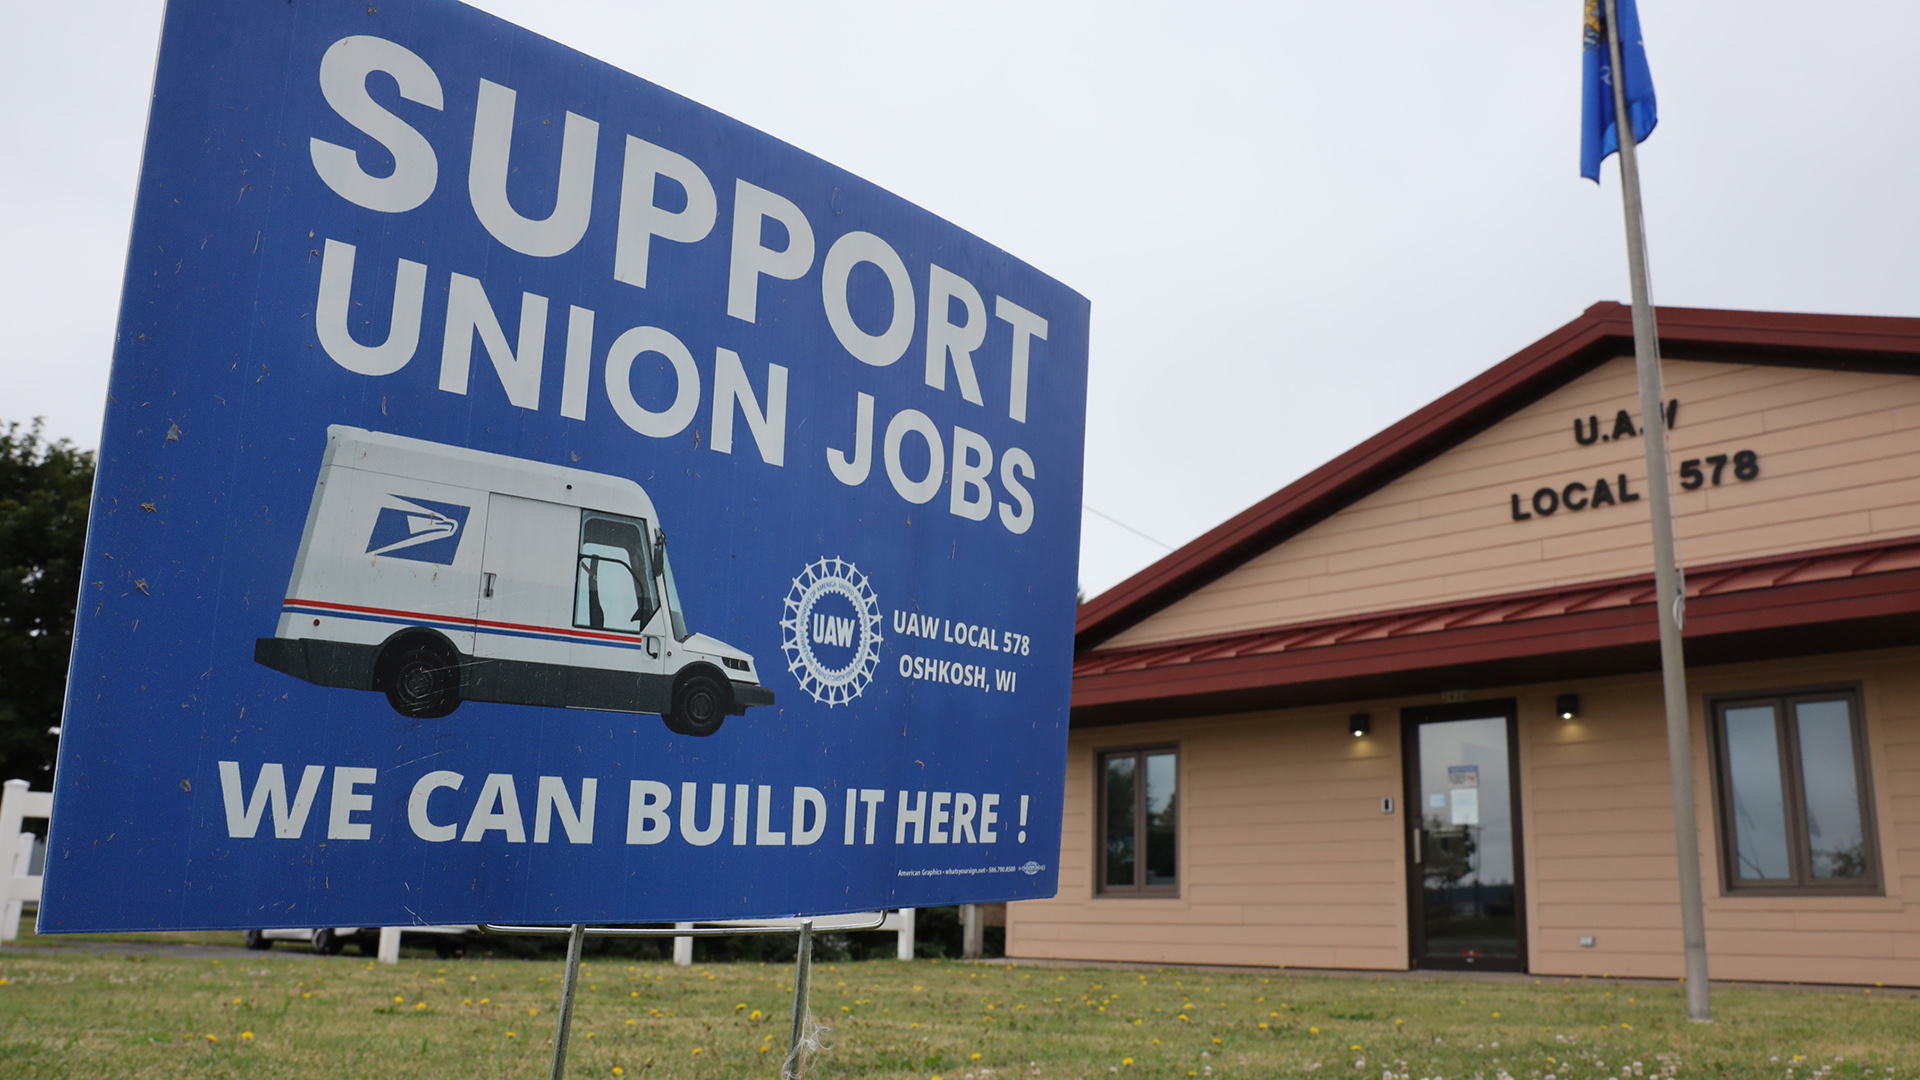 A sign with an illustration of a future postal delivery truck and the slogans "Support Union Jobs" and "We Can Build It Here!" is planted in the lawn in front of a one-story building with a sign reading "U.A.W. Local 578."